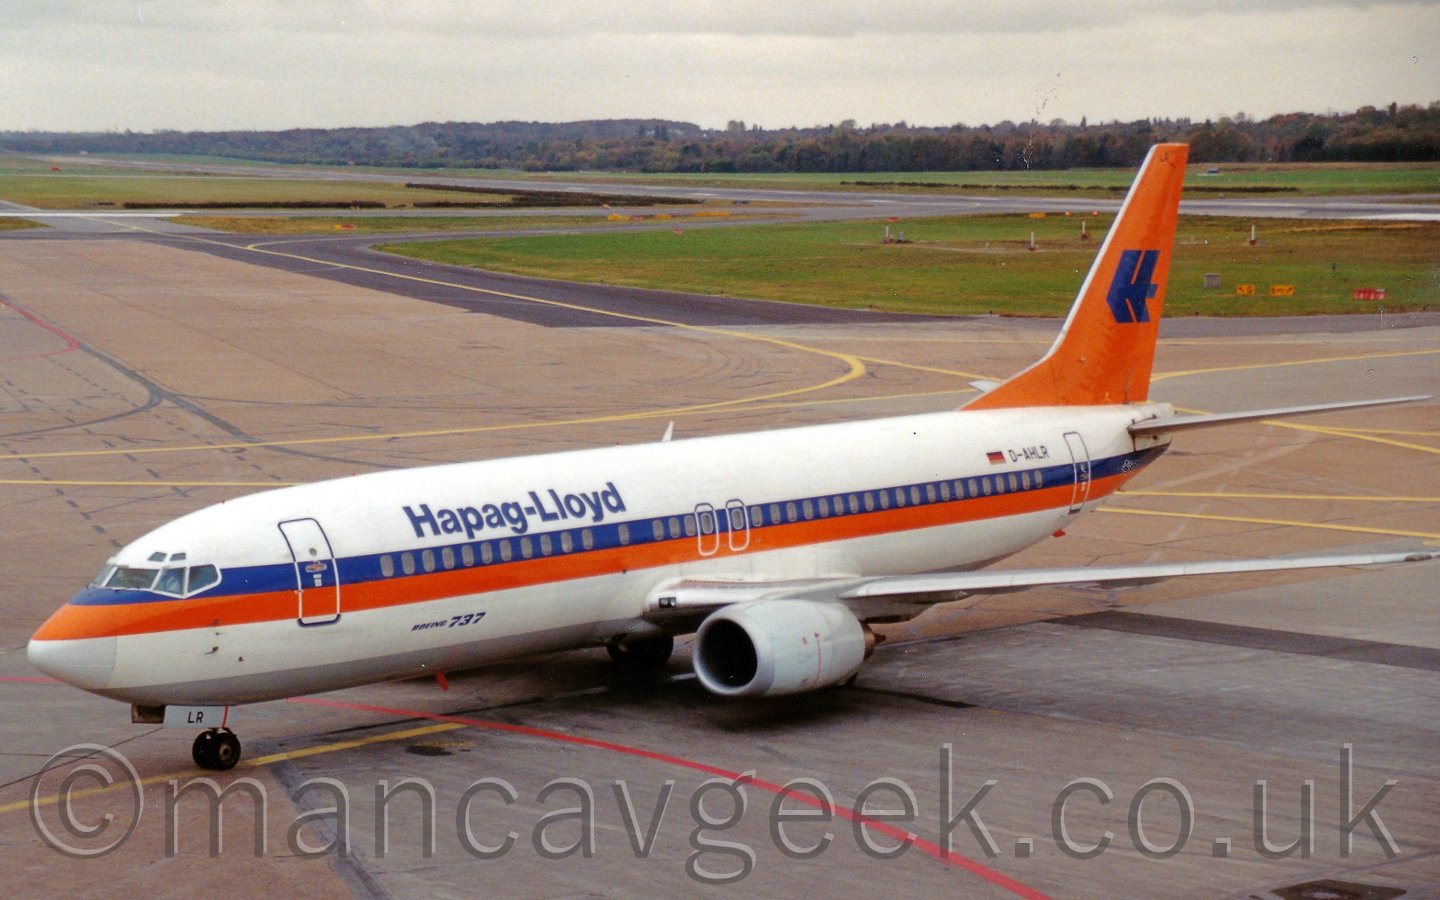 The plane is mostly white, with a grey belly, and an orange and blue cheatline running along the body, with blue "Hapag-Lloyd" titles on the upper forward fuselage. The tail is orange, with a rather angular capital letter "H" in the middle, looking similar to a double arrow head. In the background, taxiways give way to grass and a long runway, with more grass and trees beyond that, under a grey sky.